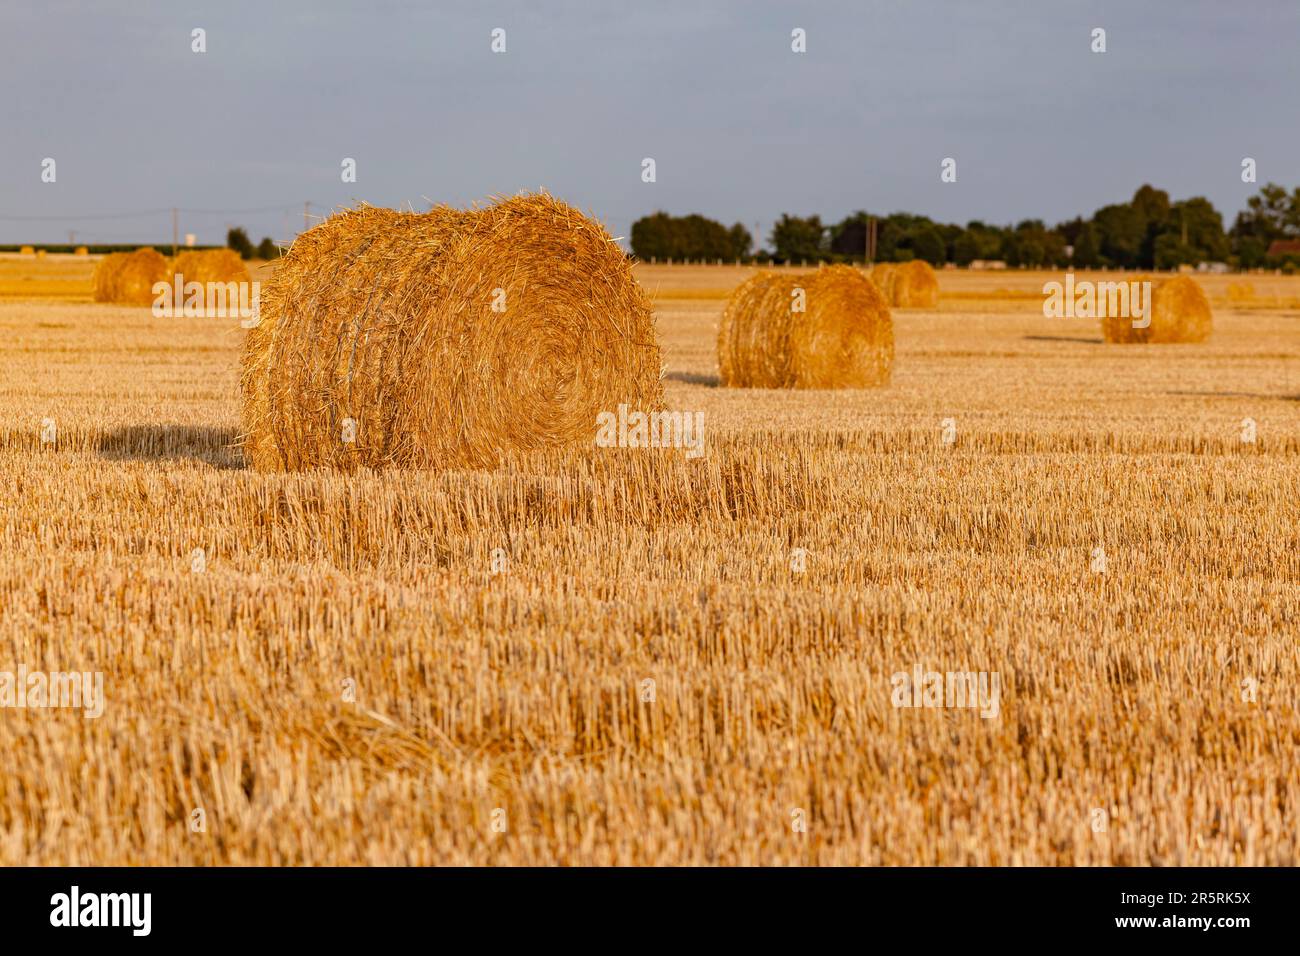 France, Eure, Trouville-la-Haule, small village near Pont-Audemer, round straw bales, in a recently harvested wheat field Stock Photo